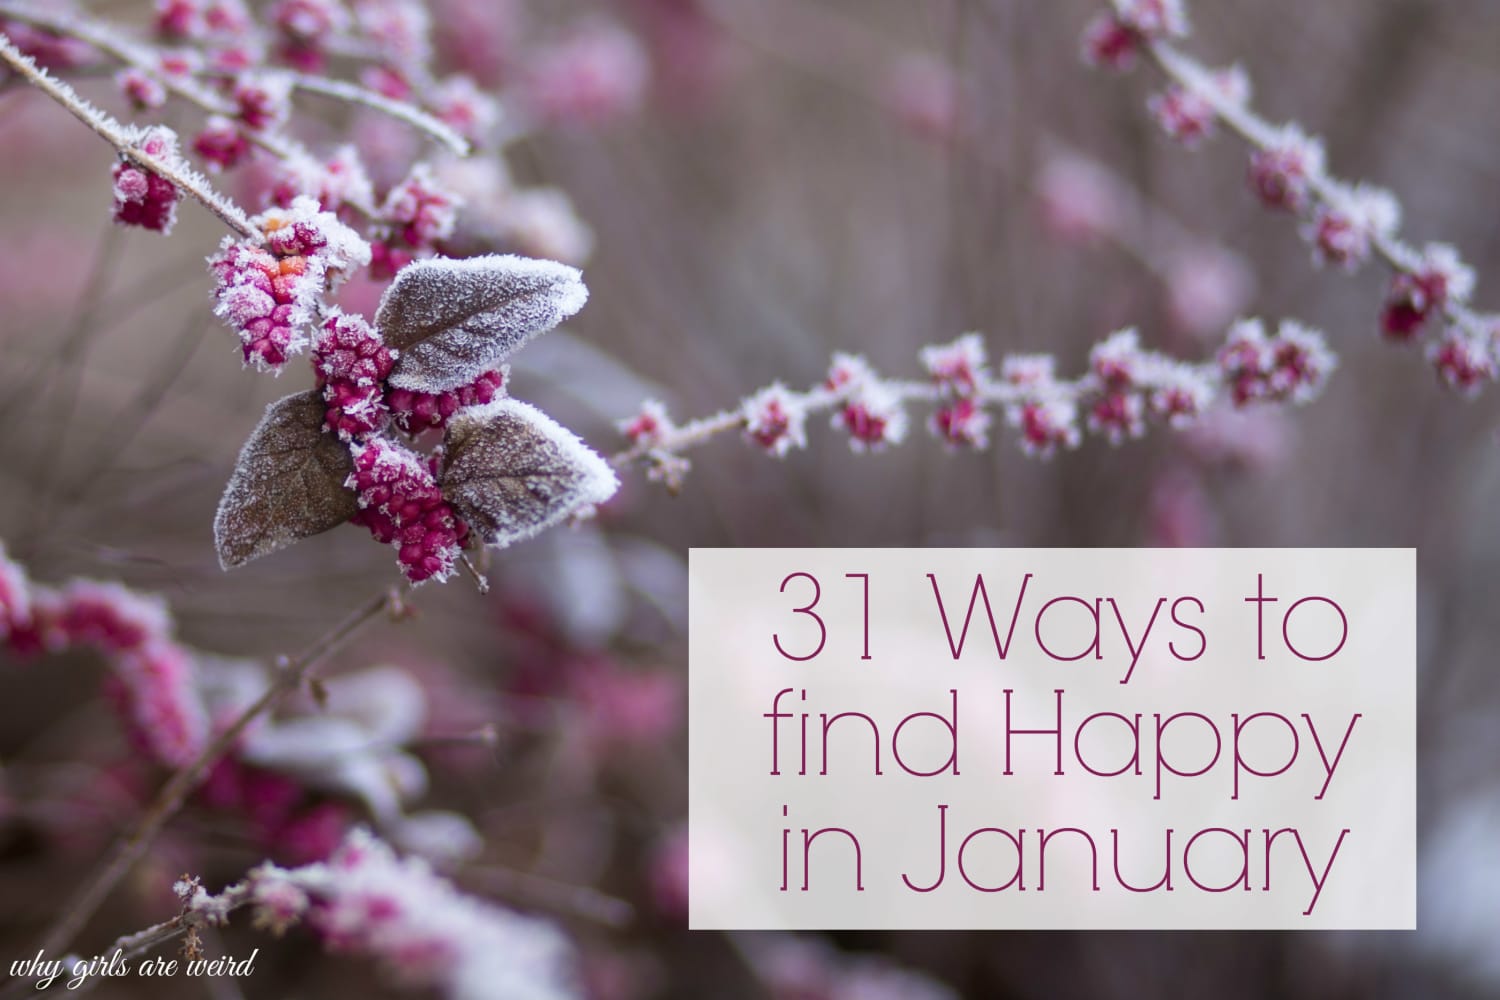 31 Ways to find Happy in January